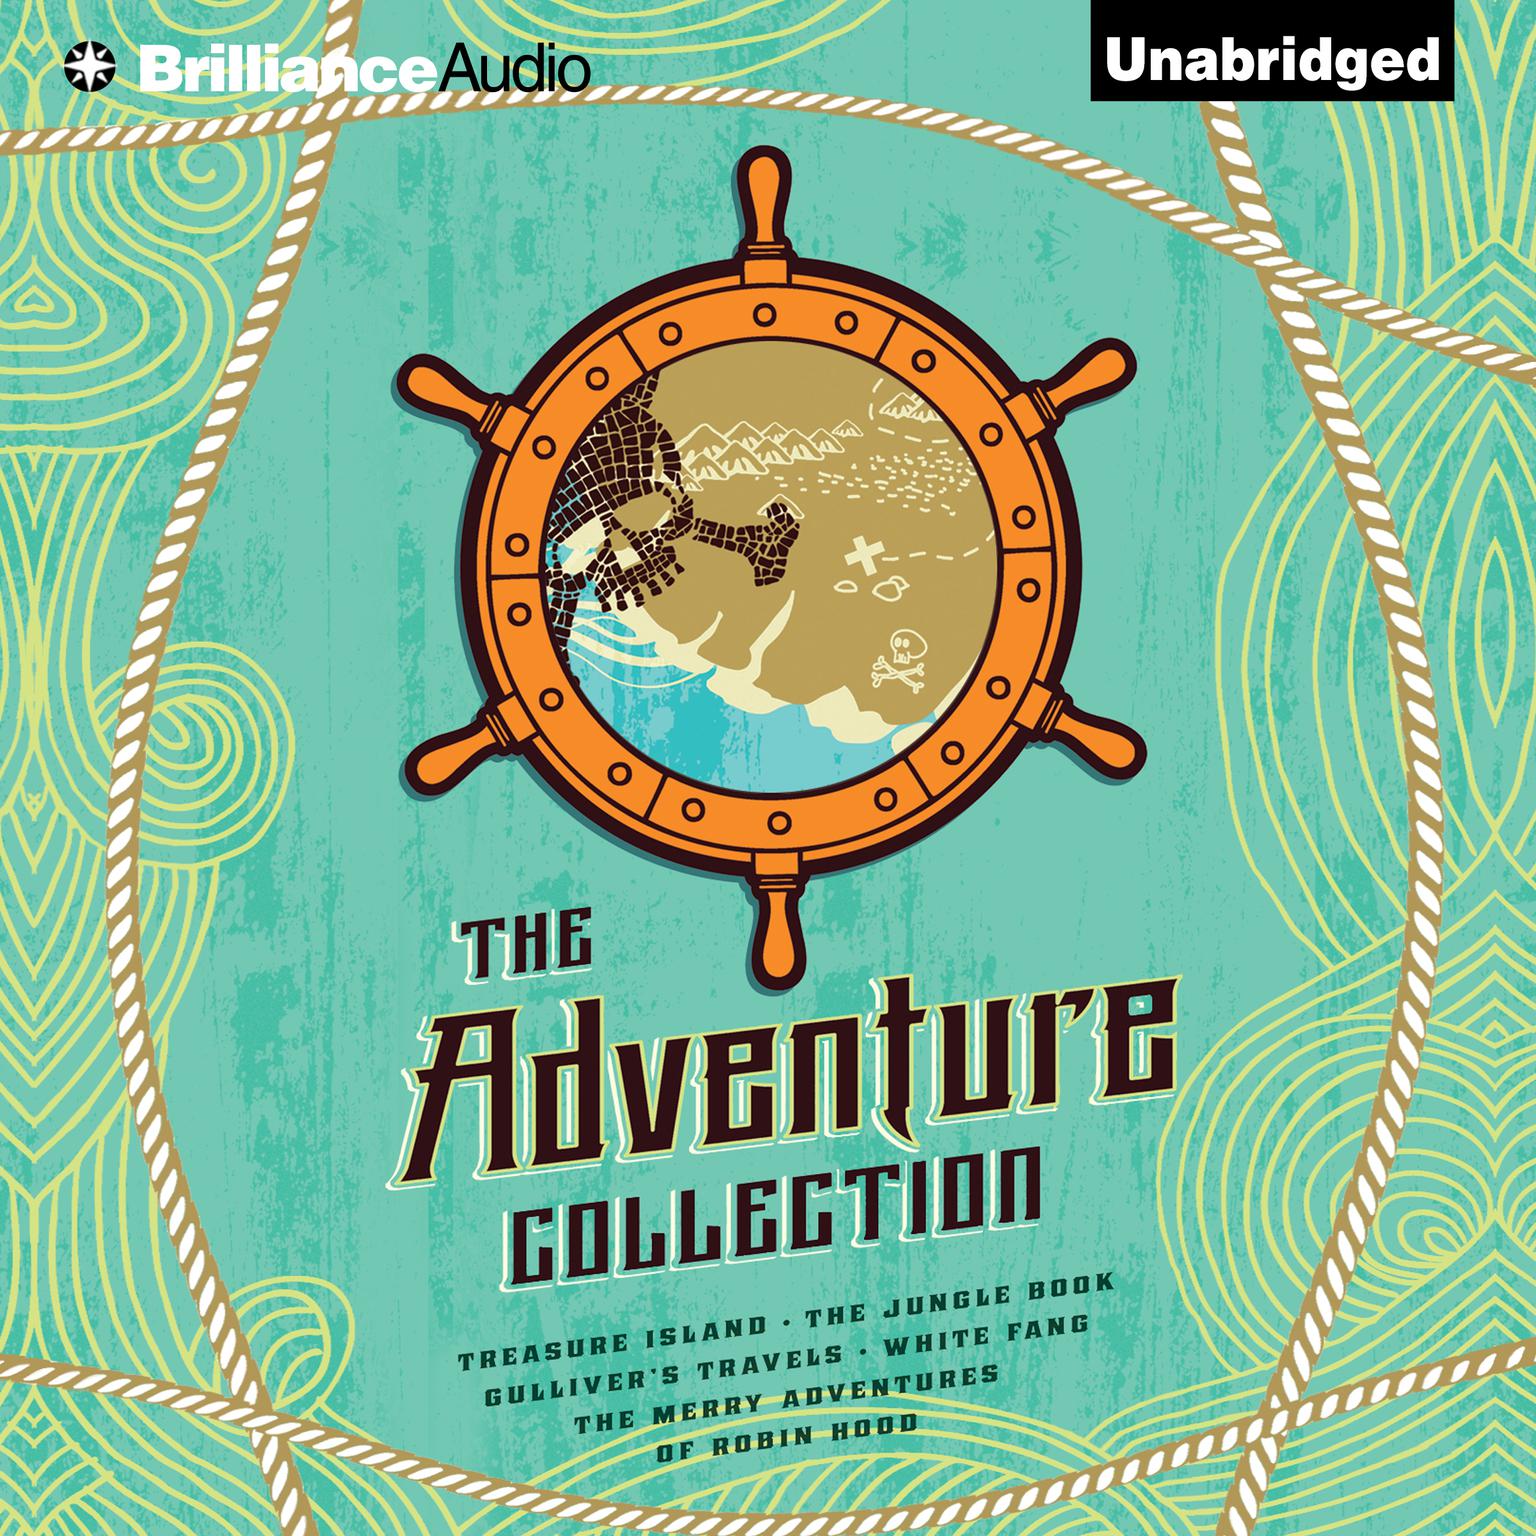 The Adventure Collection: Treasure Island, The Jungle Book, Gullivers Travels, White Fang, The Merry Adventures of Robin Hood Audiobook, by Rudyard Kipling